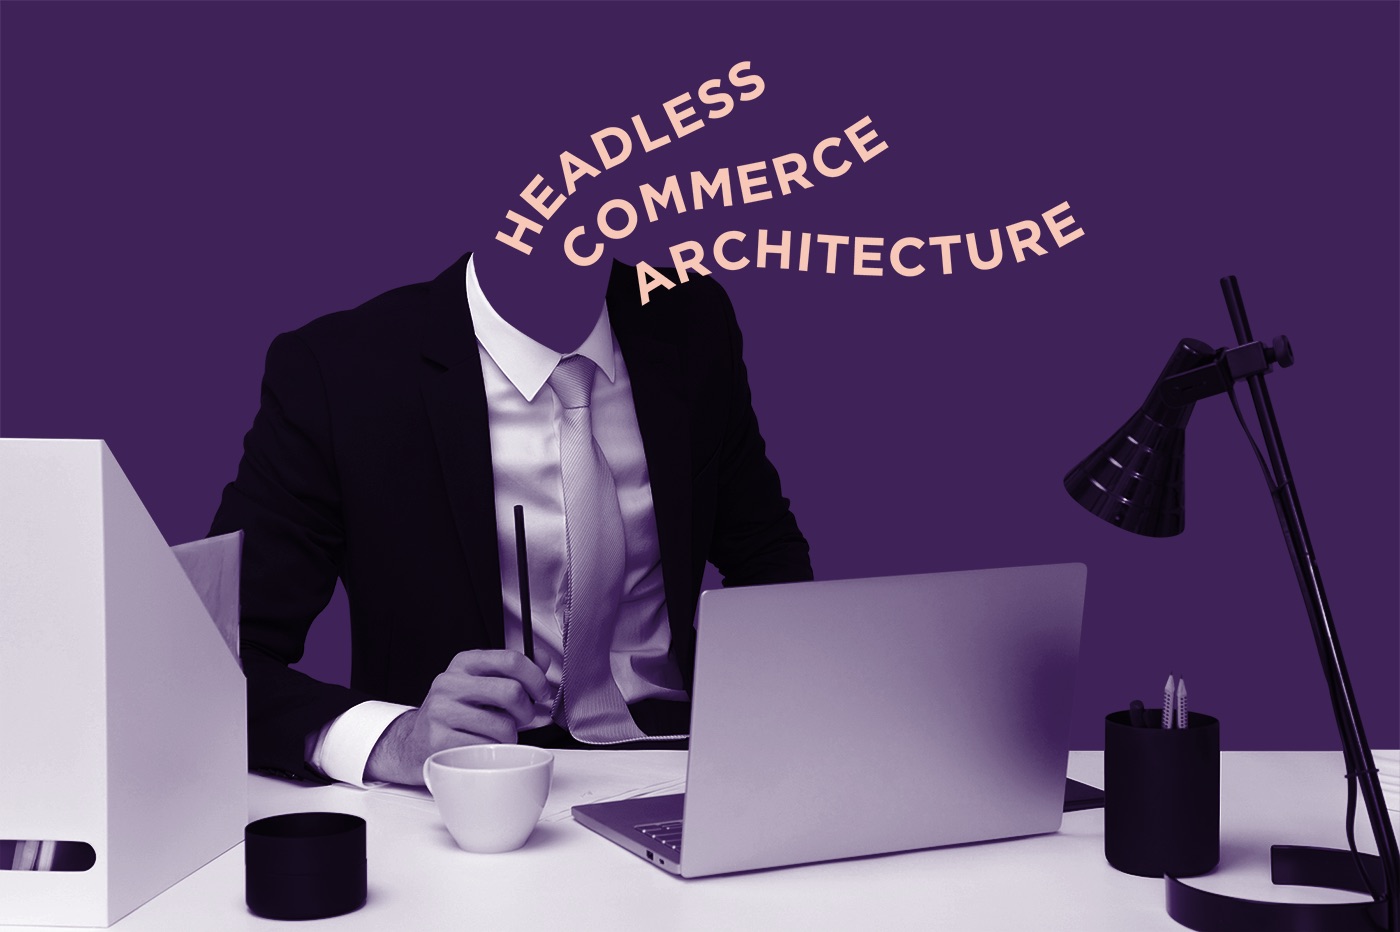 Headless Commerce Architecture: A Technical Guide